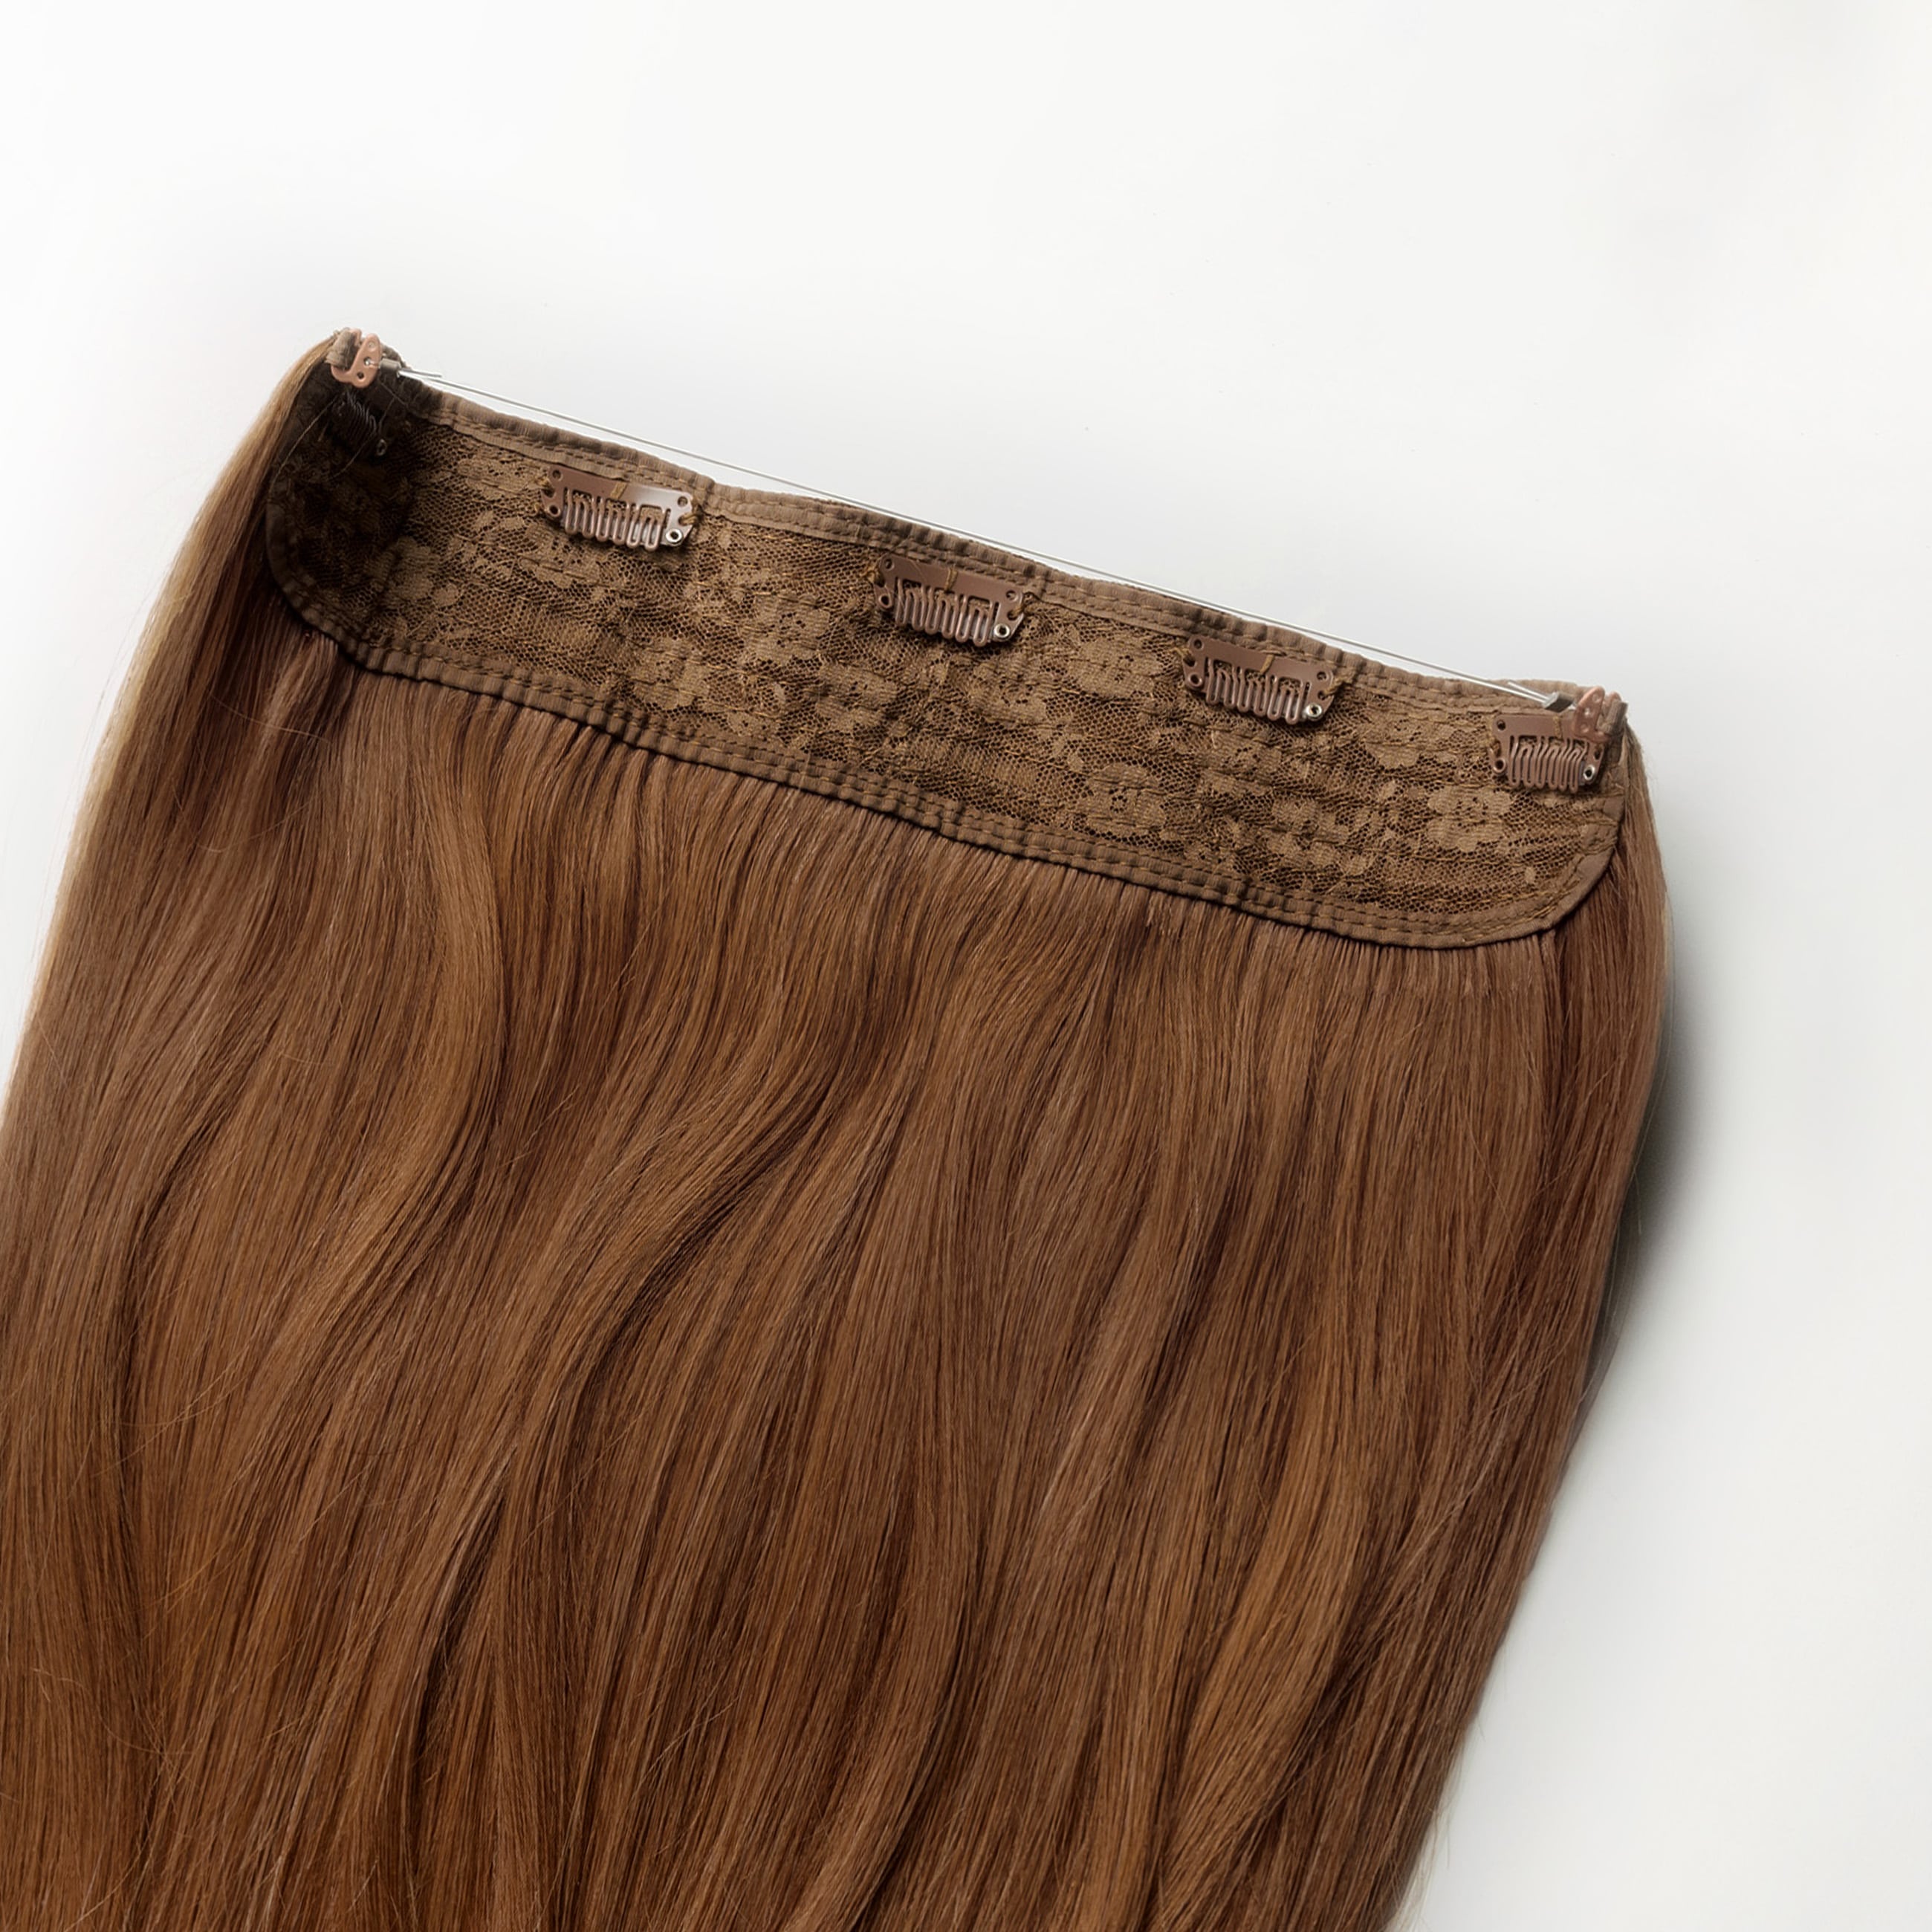 Halo hair extensions - Chestnut Brown 6